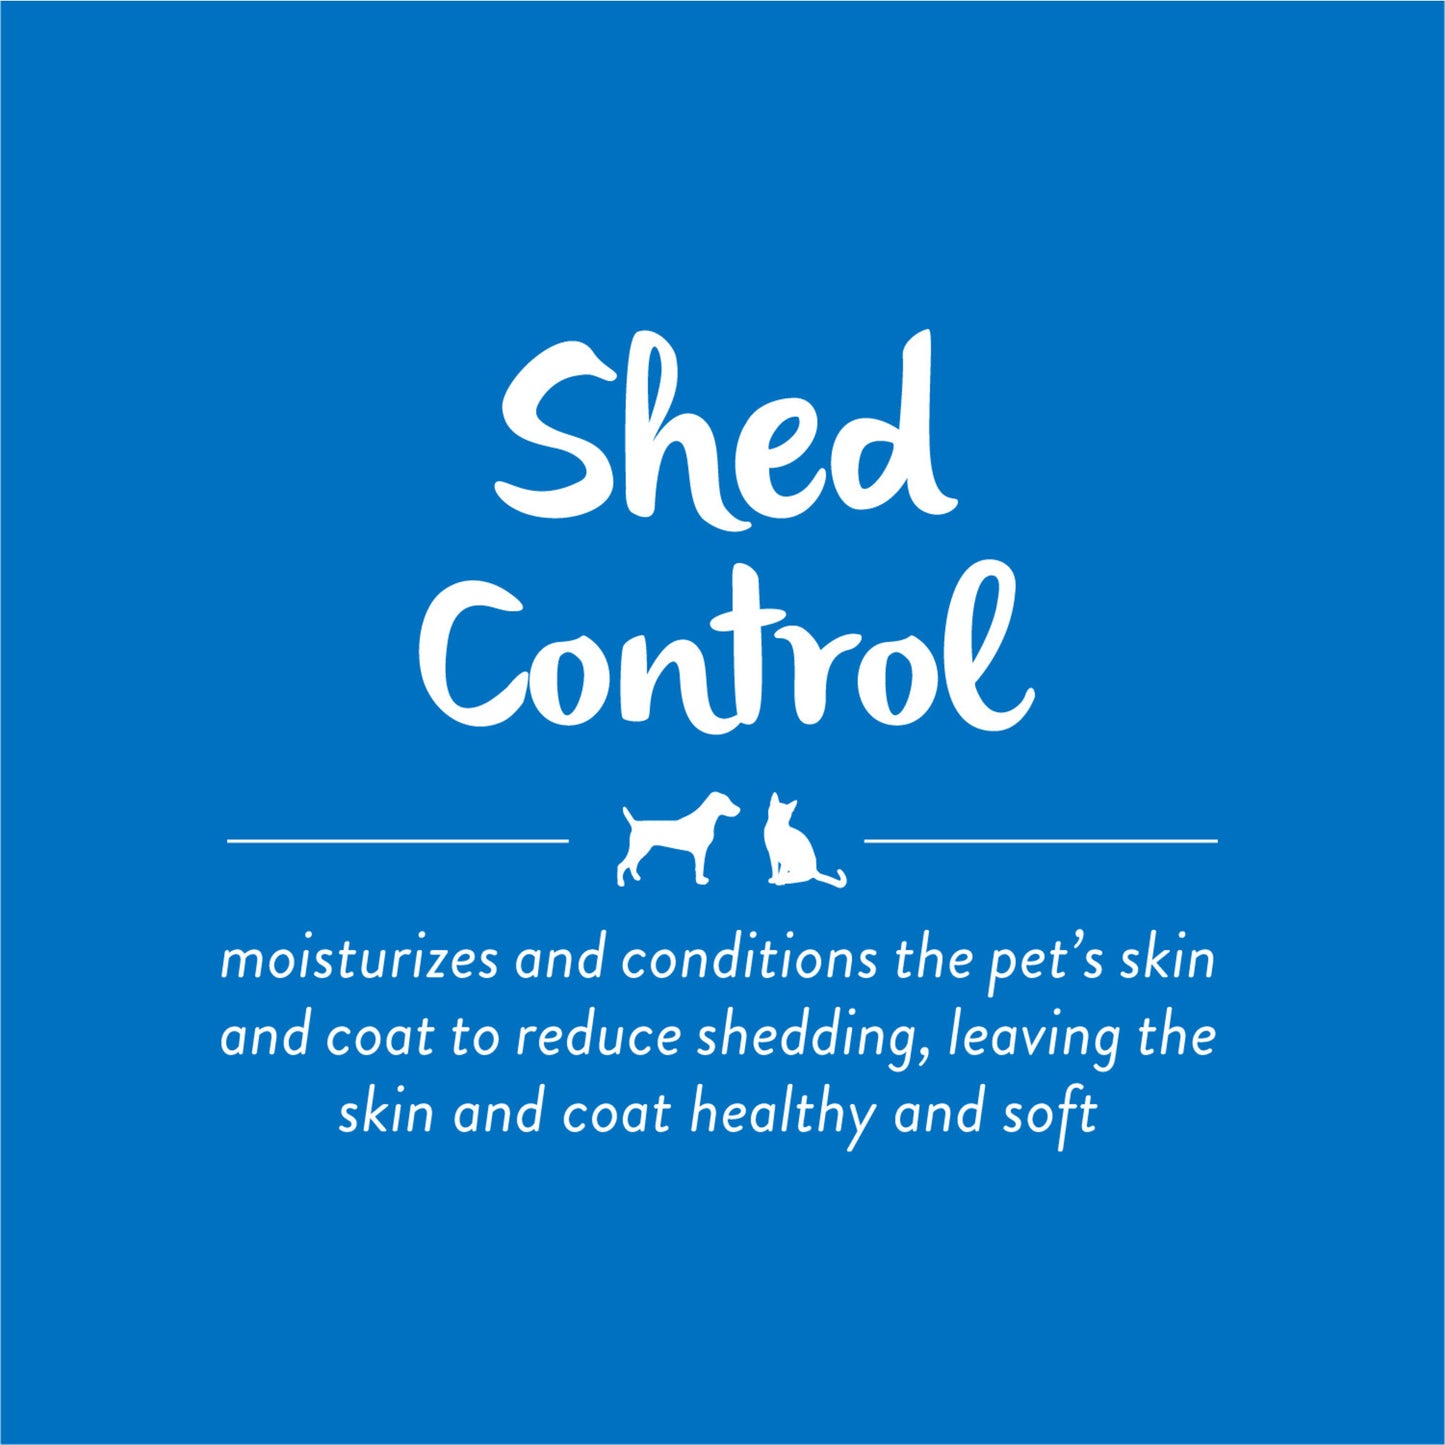 Tropiclean Lime & Cocoa Butter Shed Control Conditioner